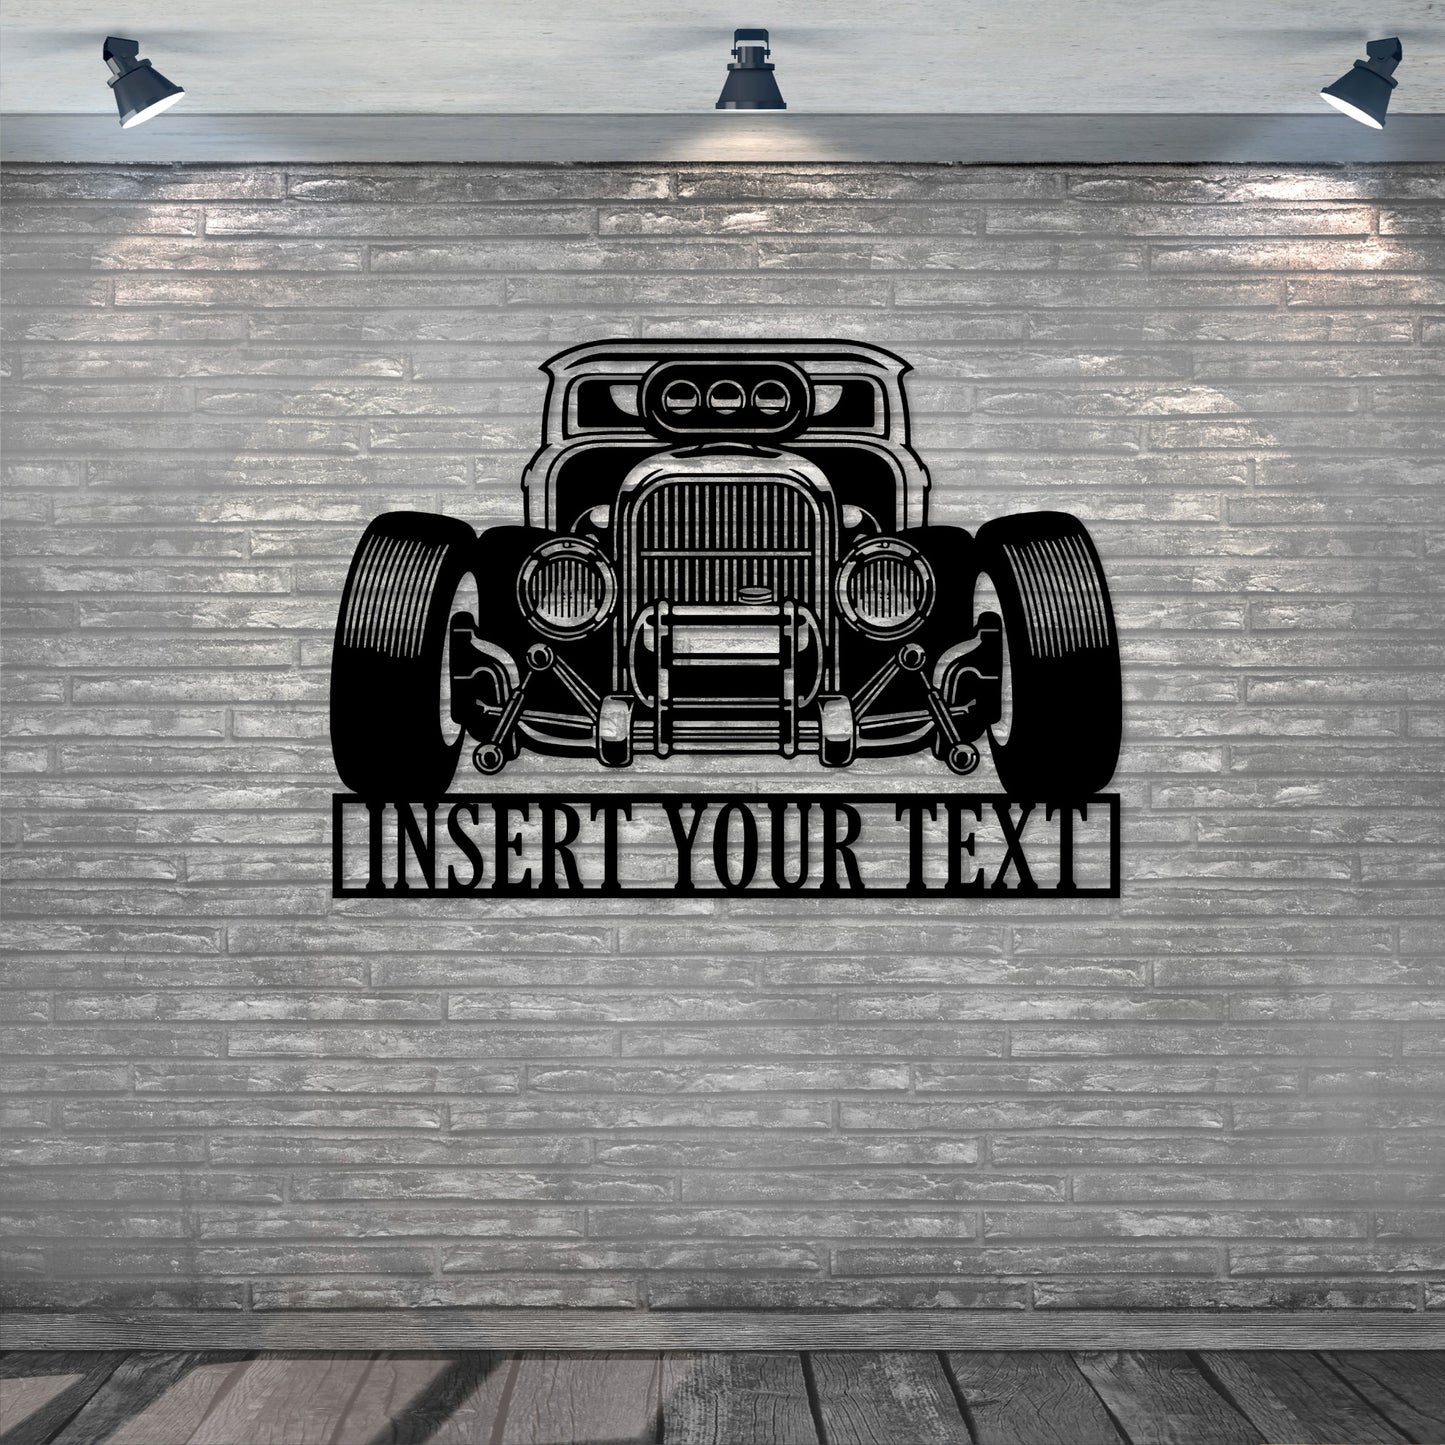 Personalized Rat Rod Name Metal Sign. Custom Garage Wall Decor Gift. Chop Shop Wall Hanging. Gift For Mechanic. American Muscle V8. Monogram